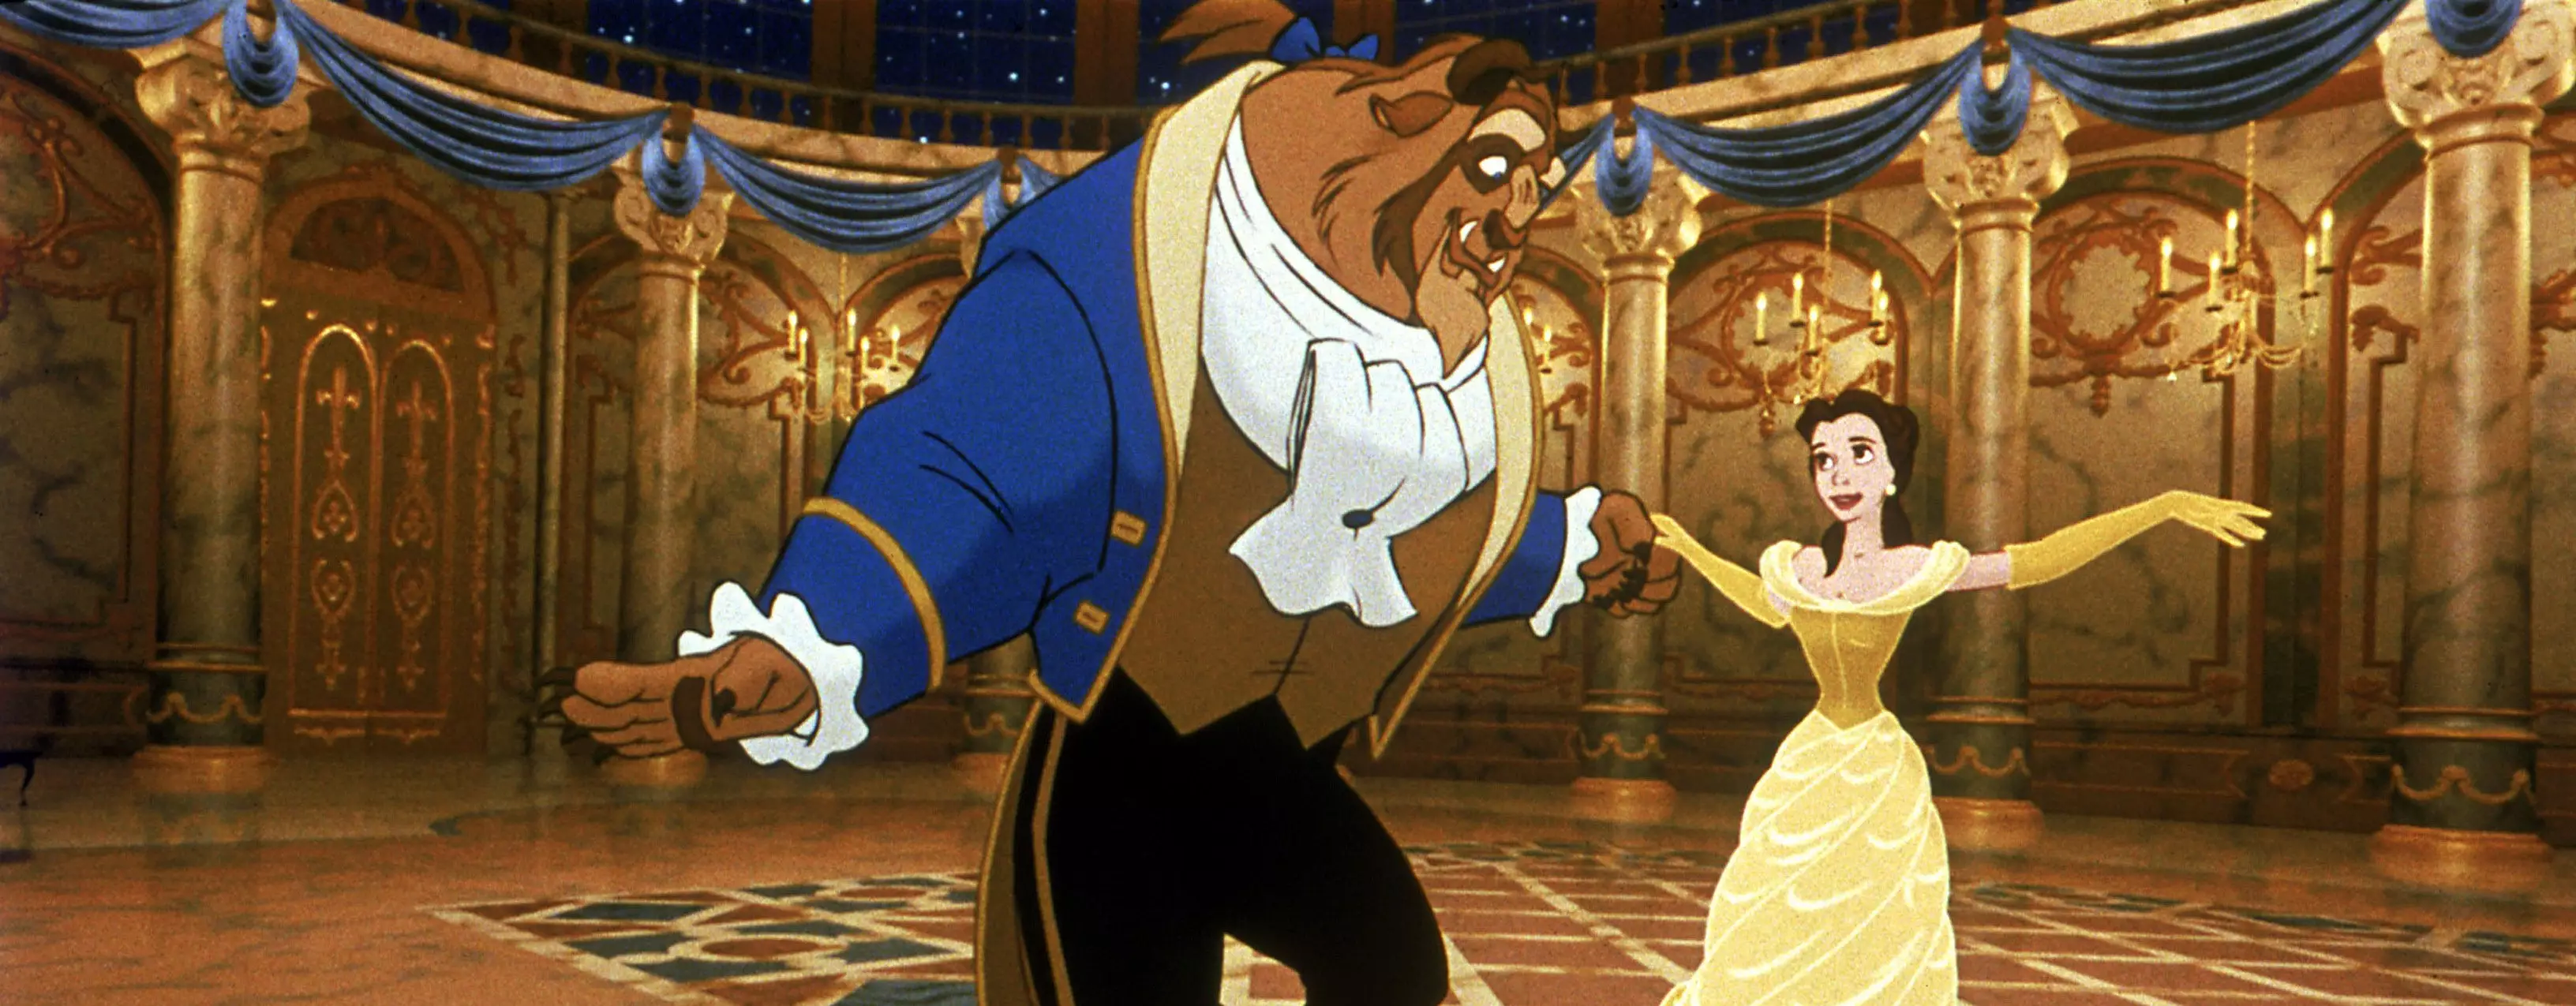 Beauty and the Beast was a Disney classic (